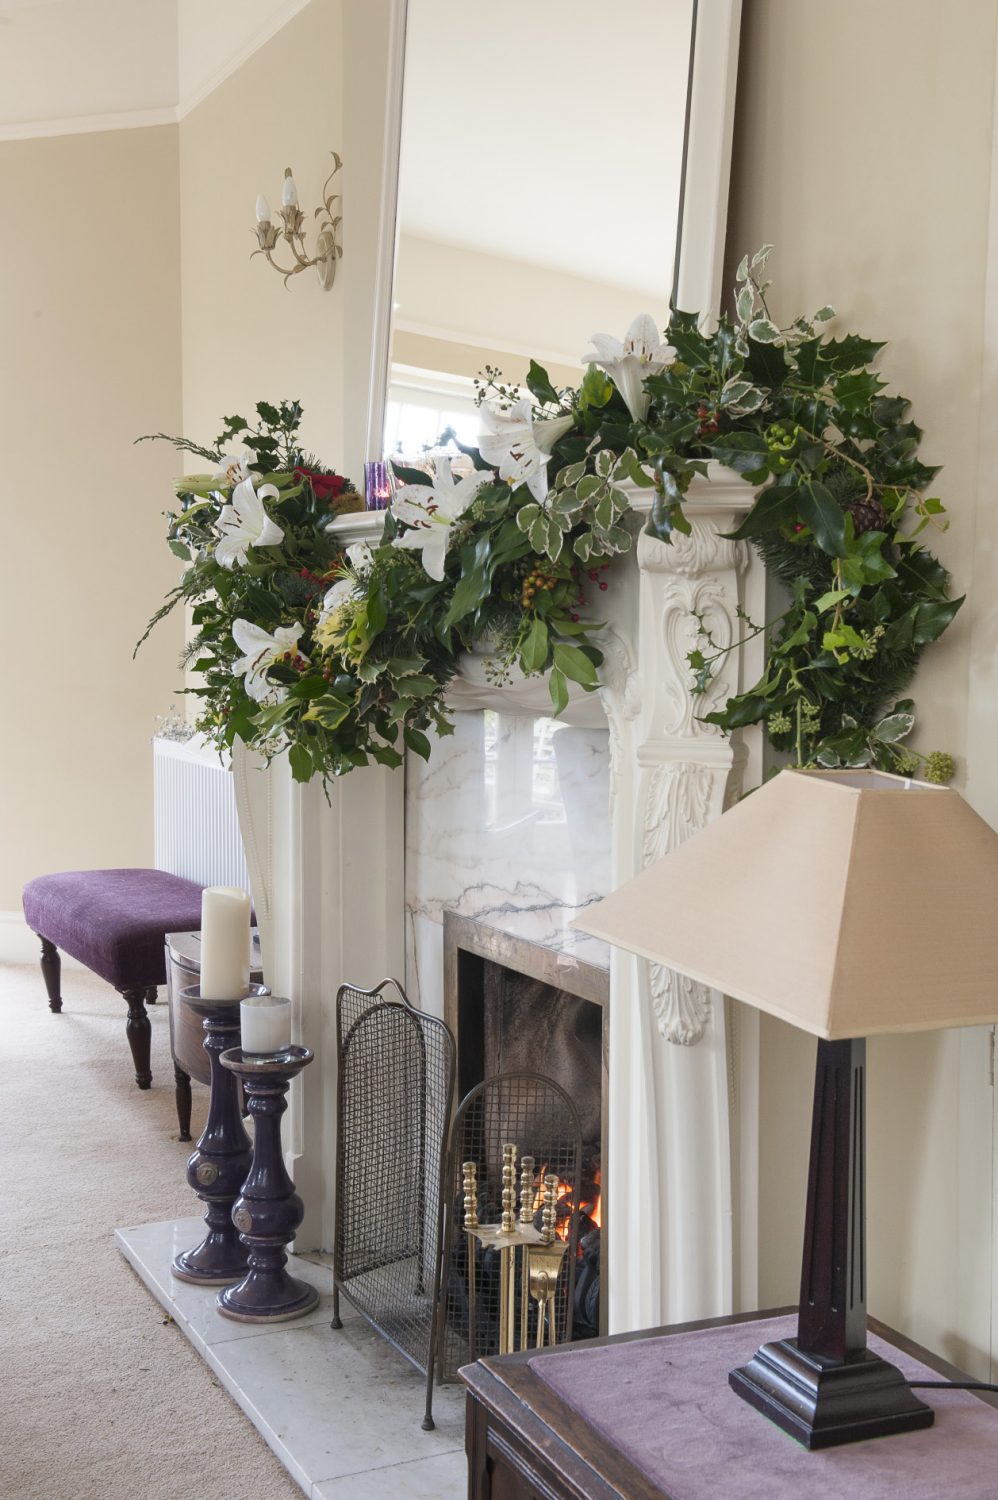 In the drawing room a marble fireplace has been adorned with a swag of berried holly, dark evergreen leaves and white stargazer lilies. The Christmas tree has been decorated with purple and gold ornaments